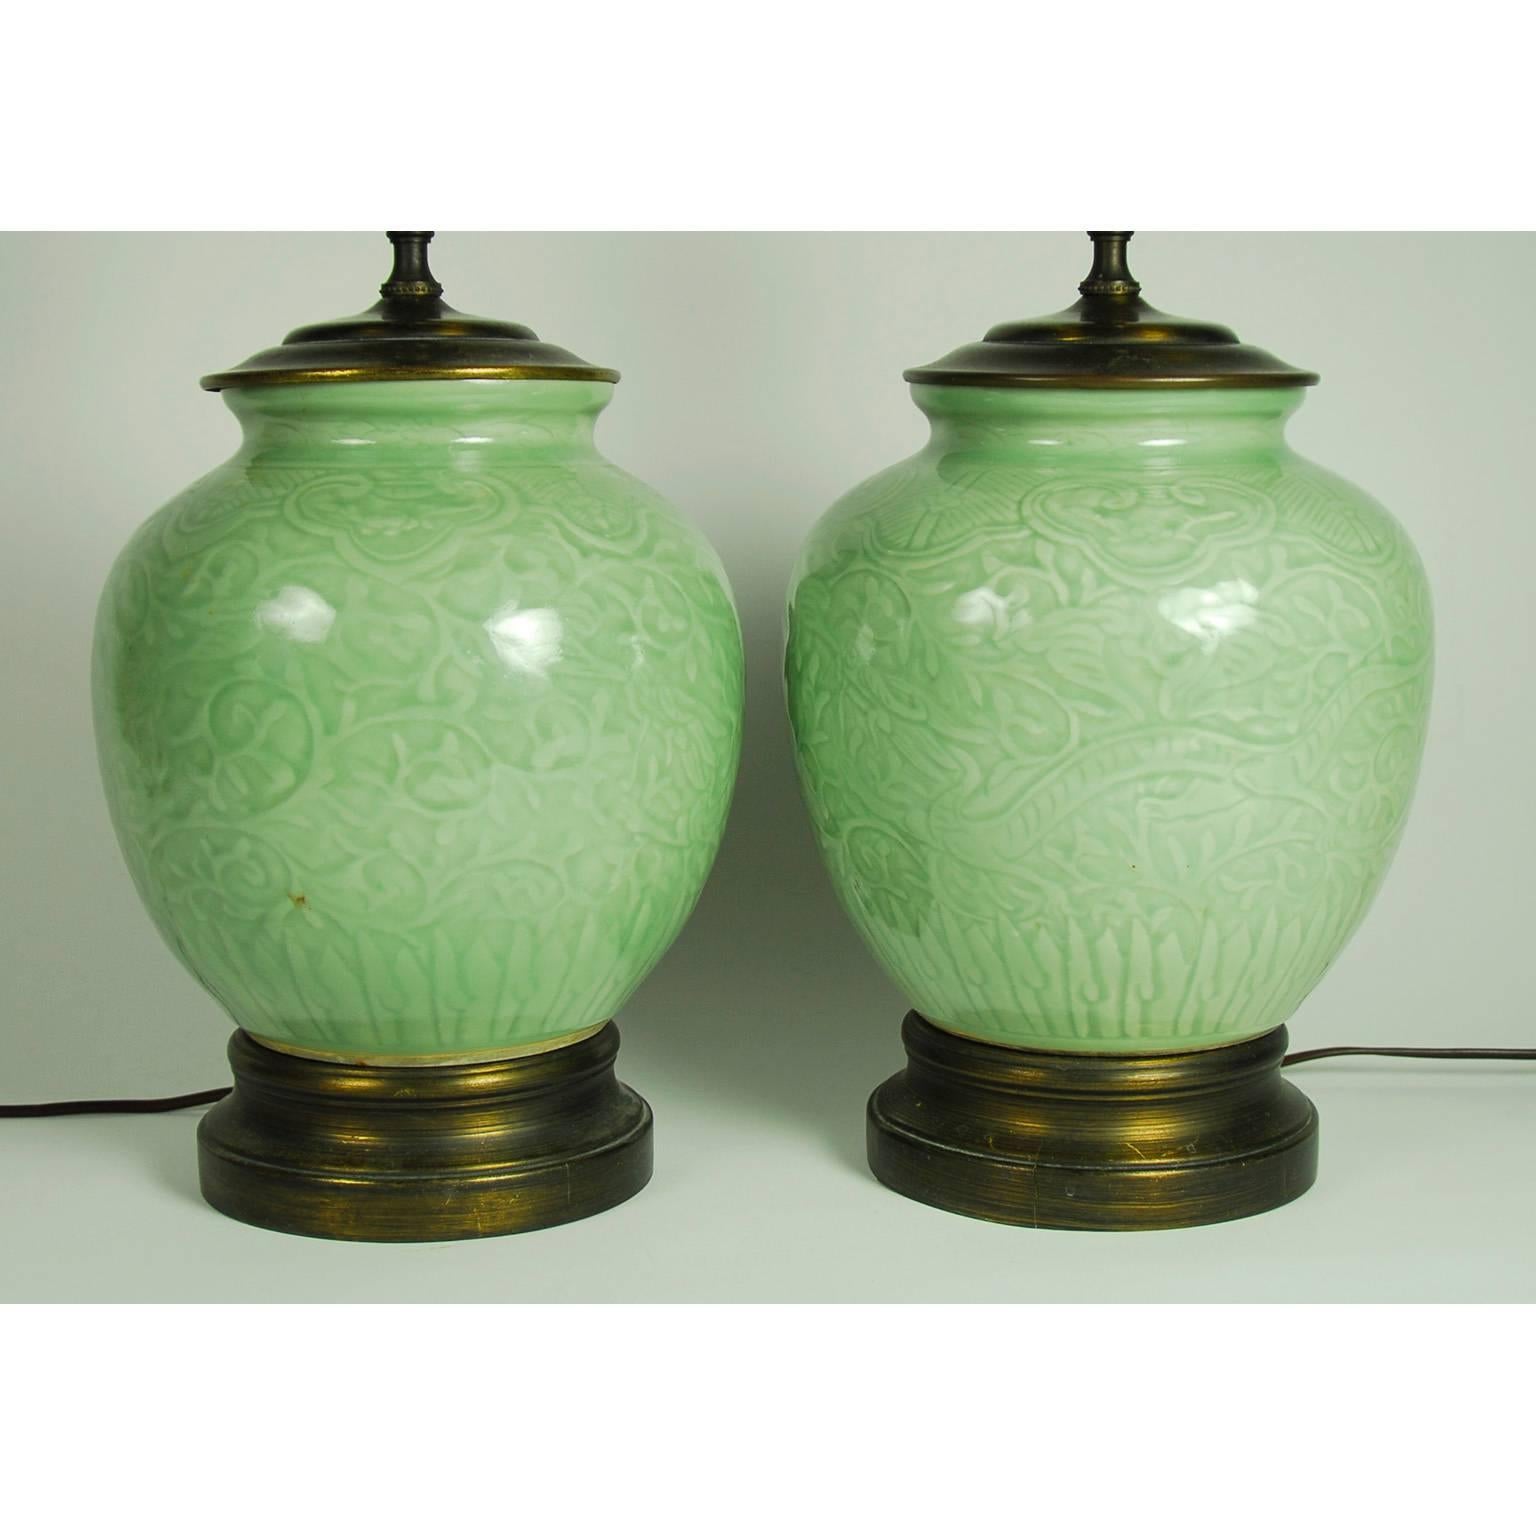 Pair of Chinese Celadon porcelain ginger jars, now fitted as lamps. Mounted on brass base with different jadite finials. Without shades, 19th century.